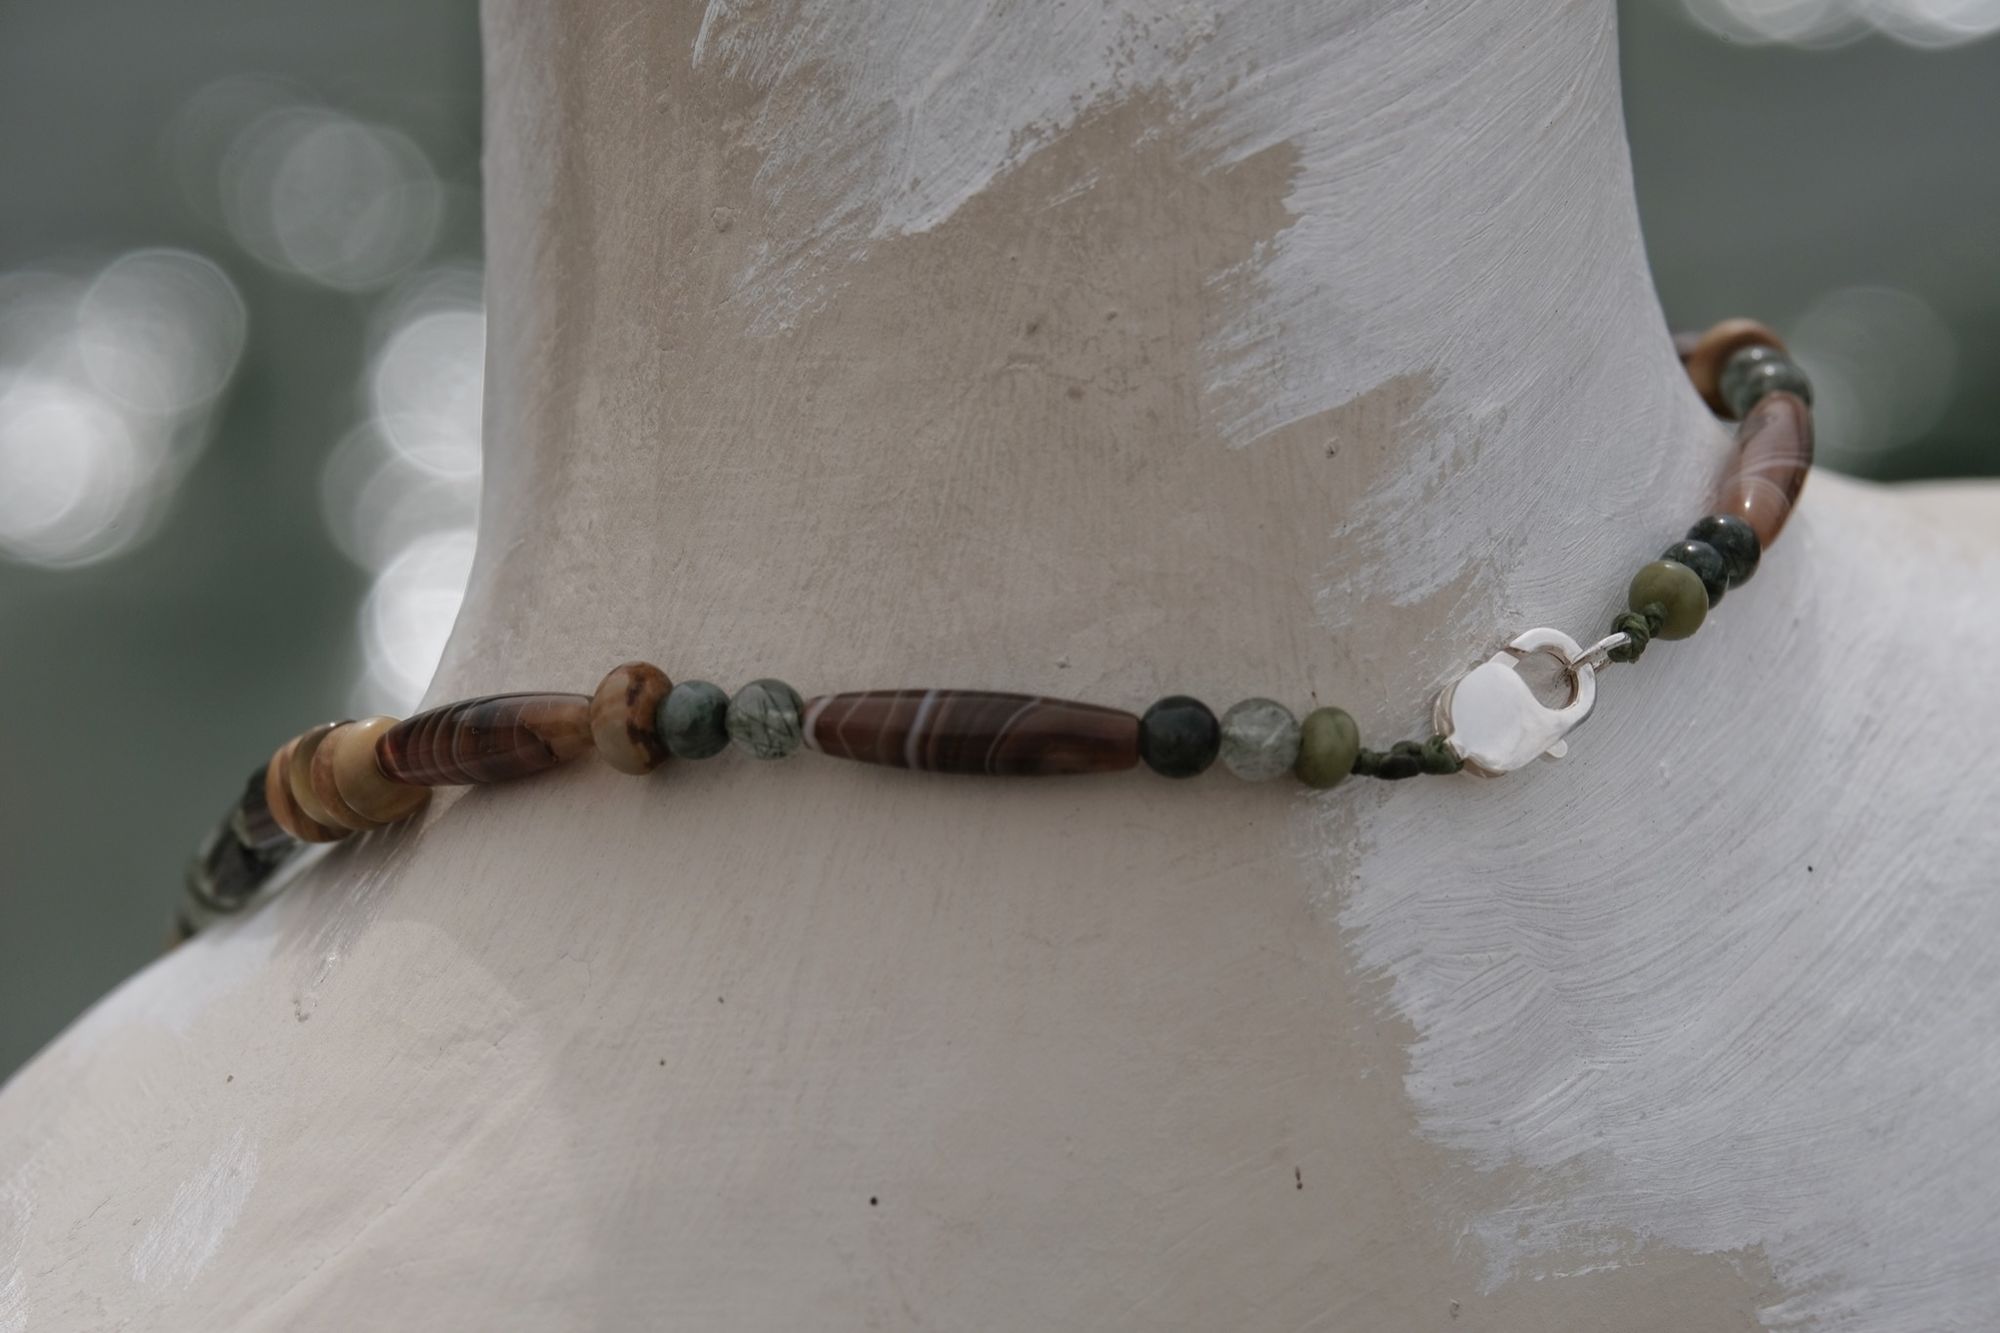 A necklace of brown, green, tan and black semi precious stone beads with a silver and gold moon at the center rests on a white mannequin